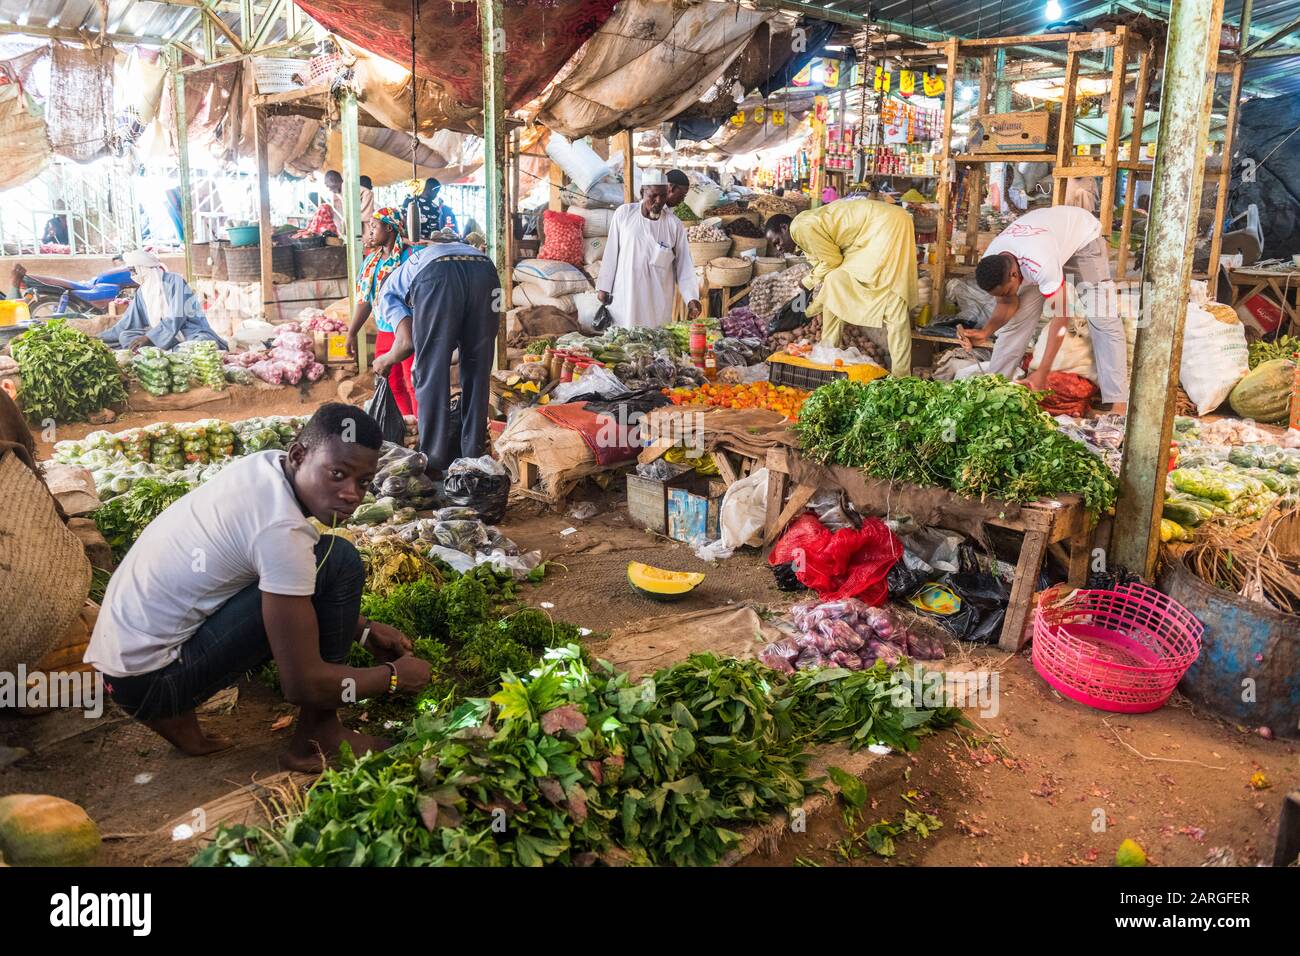 Vegetables for sale in the Central market of Agadez, Niger, West Africa, Africa Stock Photo